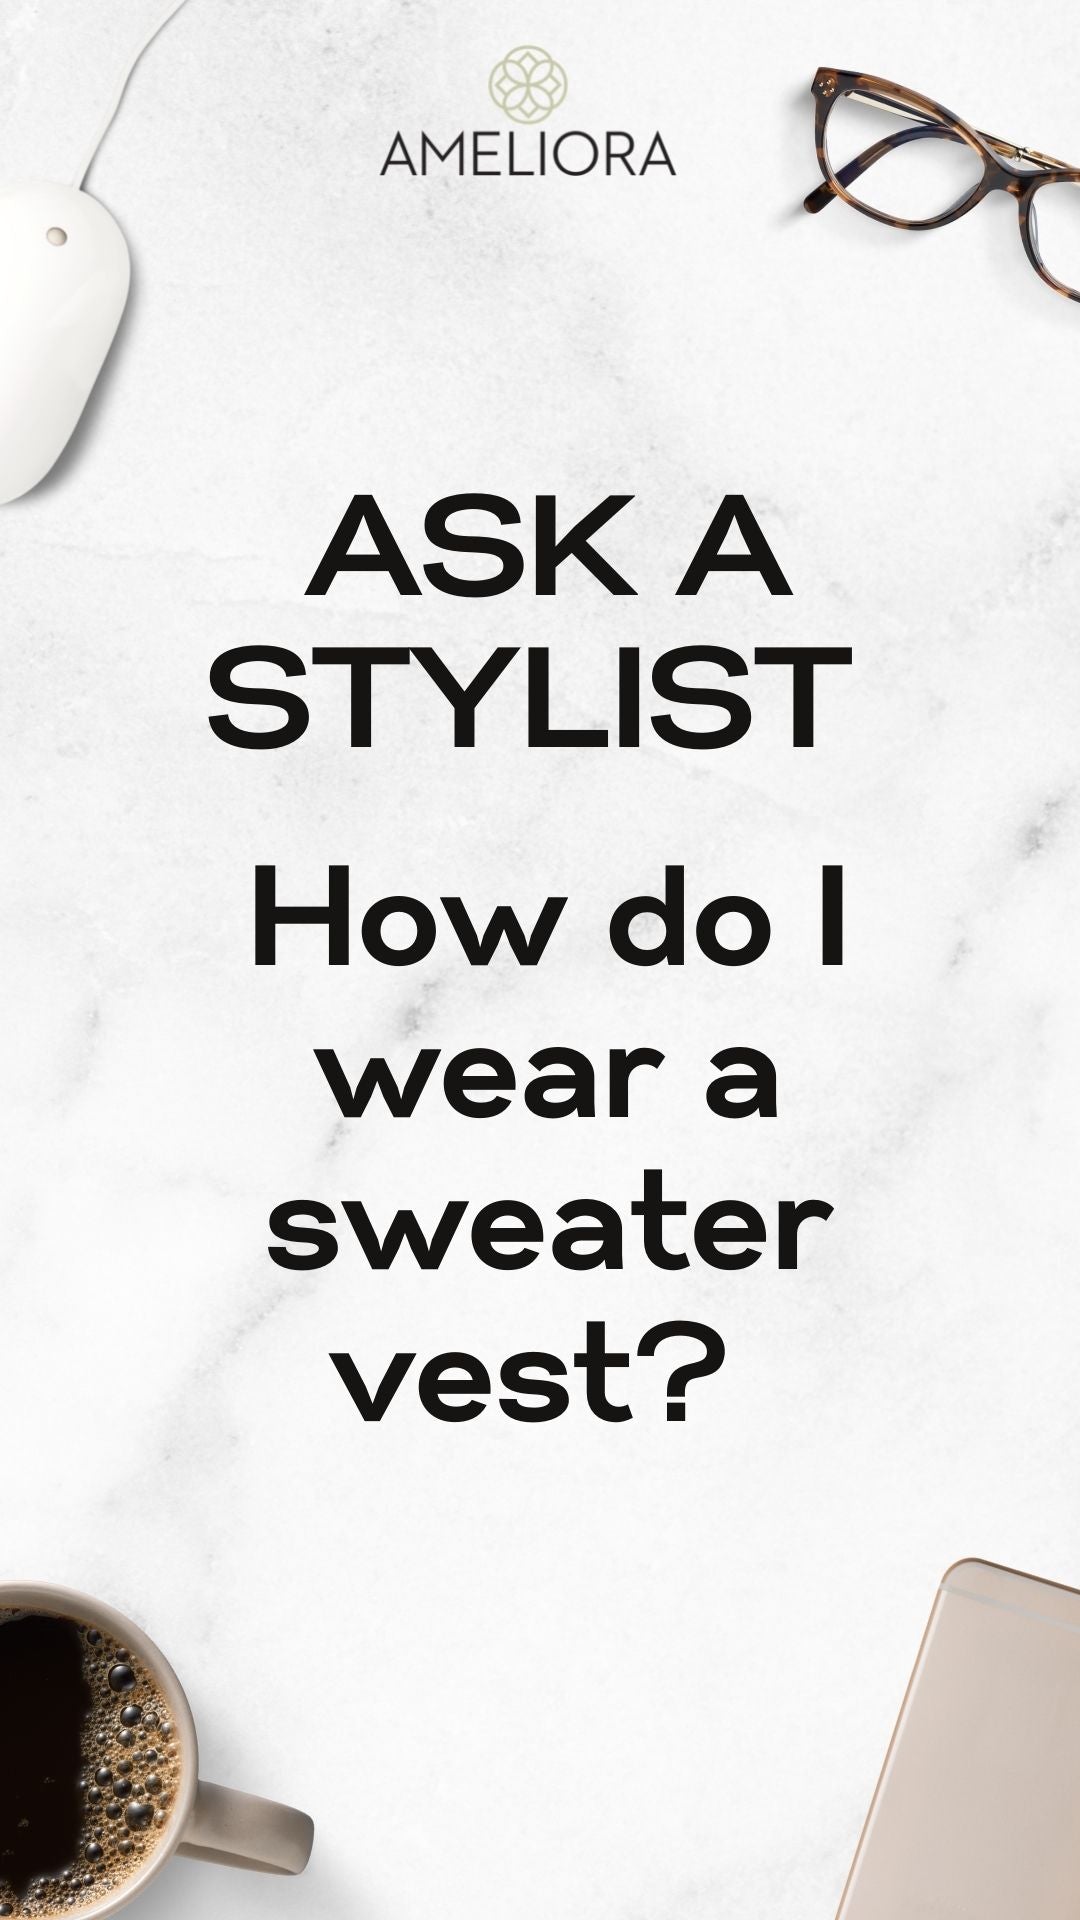 How do I wear a sweater vest?